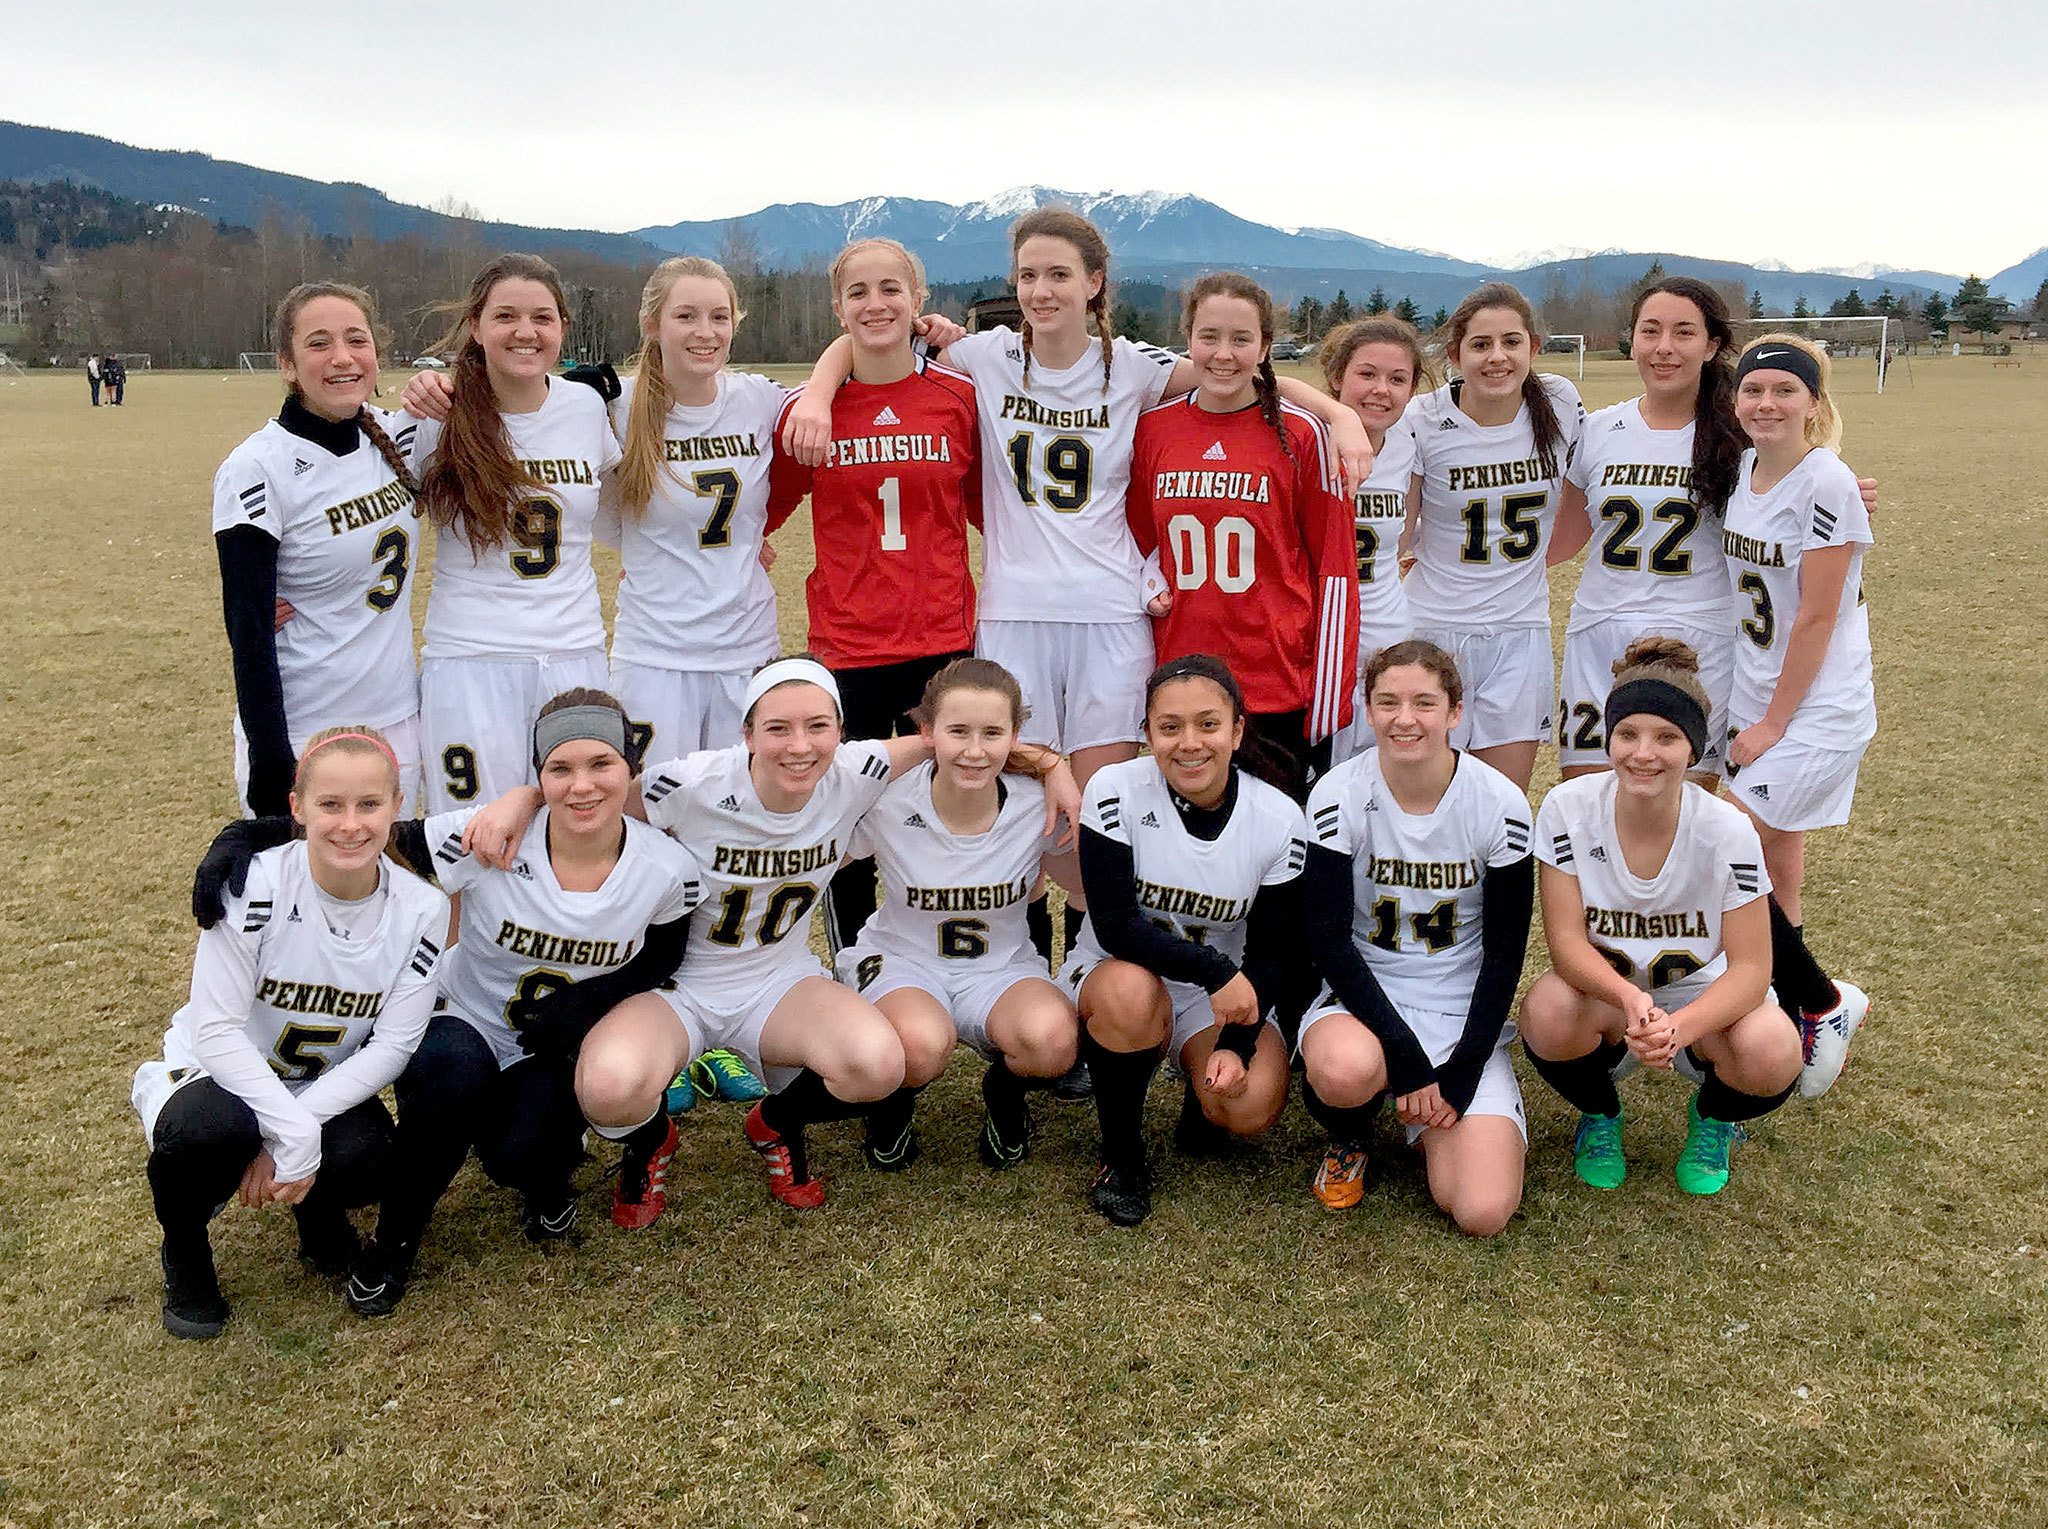 Courtesy photo                                The Peninsula Soccer Academy girls’ team. Top row, from left: Yana Hoesel, Erin Vig,Kennedy Mason, Claire Henninger, Shanzi Cosgrove, Bonnie Sires, Nicole Heaton, Lola DelGuzzi-Flores, Oliver Barrett and Alivia Carvell. Bottom row, from left, Sierra Robinson, Annika Carlson, Leah Haworth, Delaney Wenzl, Nathalie Torres, Claire Payne and Peyton Hefton.